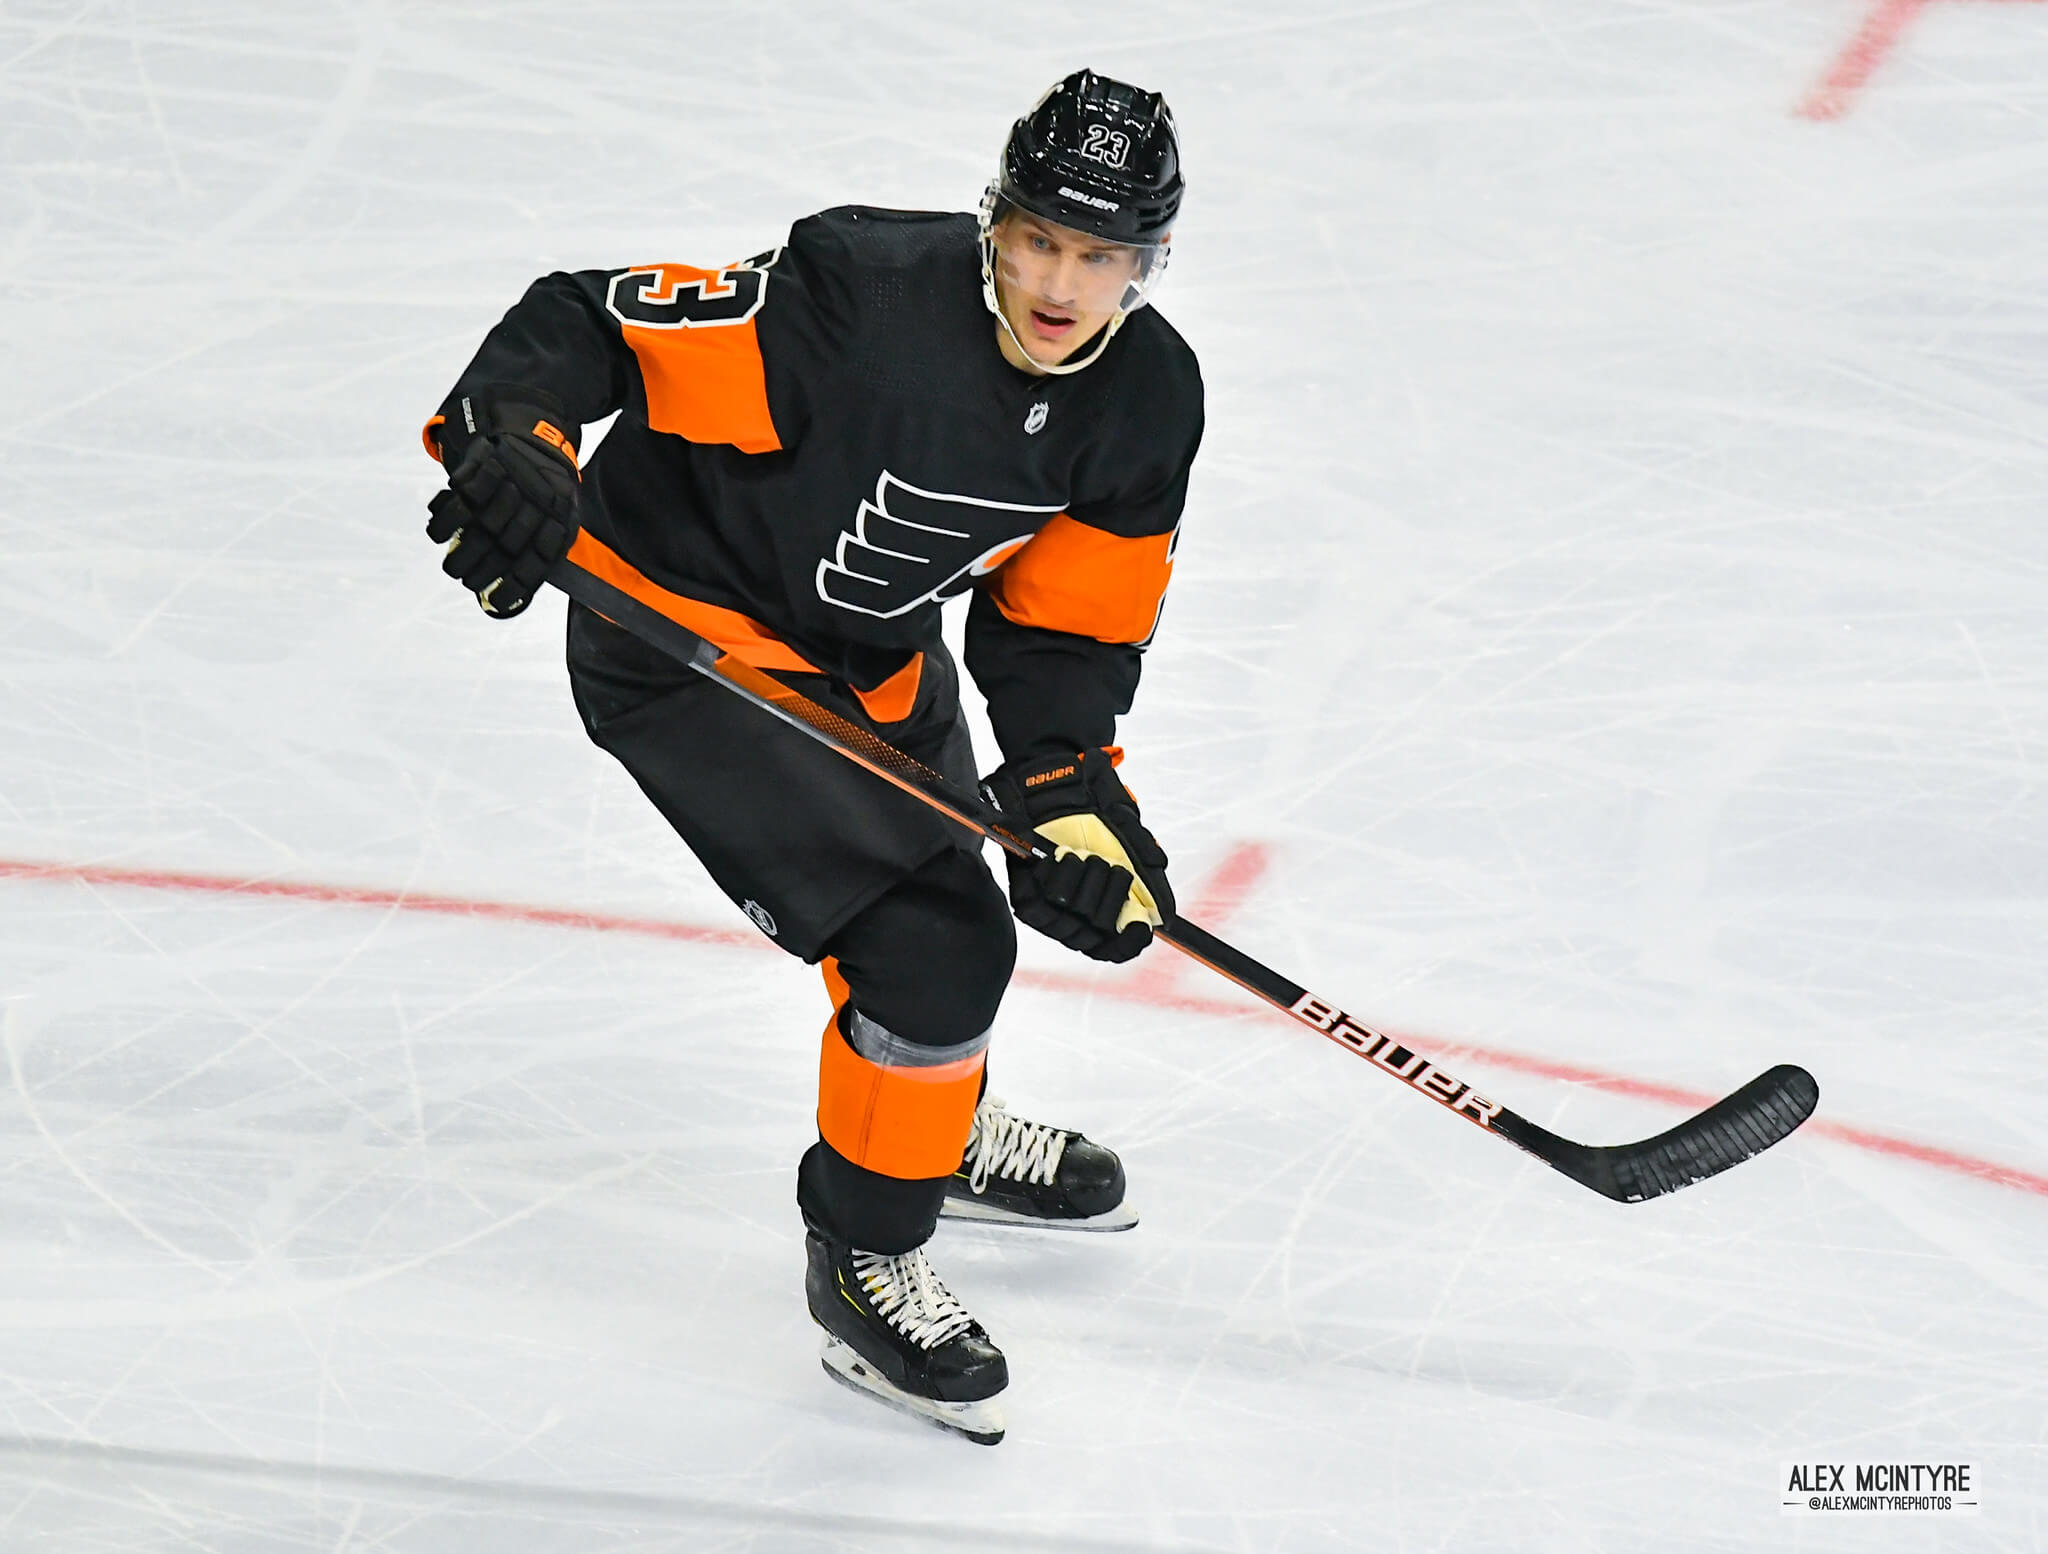 Flyers place Oskar Lindblom on waivers, aiming to buy out final year of  contract